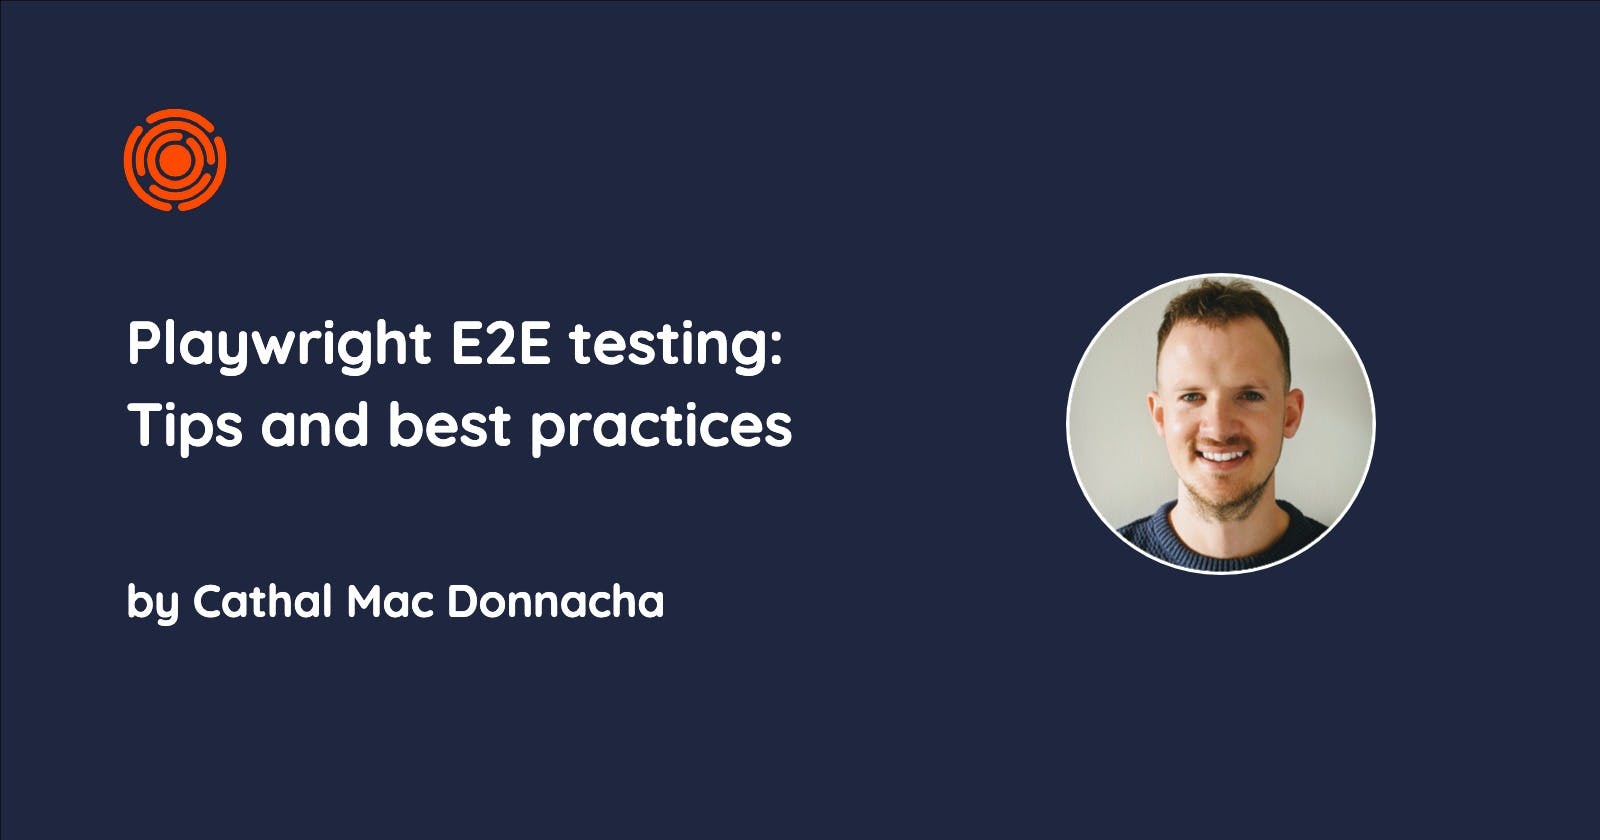 Playwright E2E testing: Tips and best practices